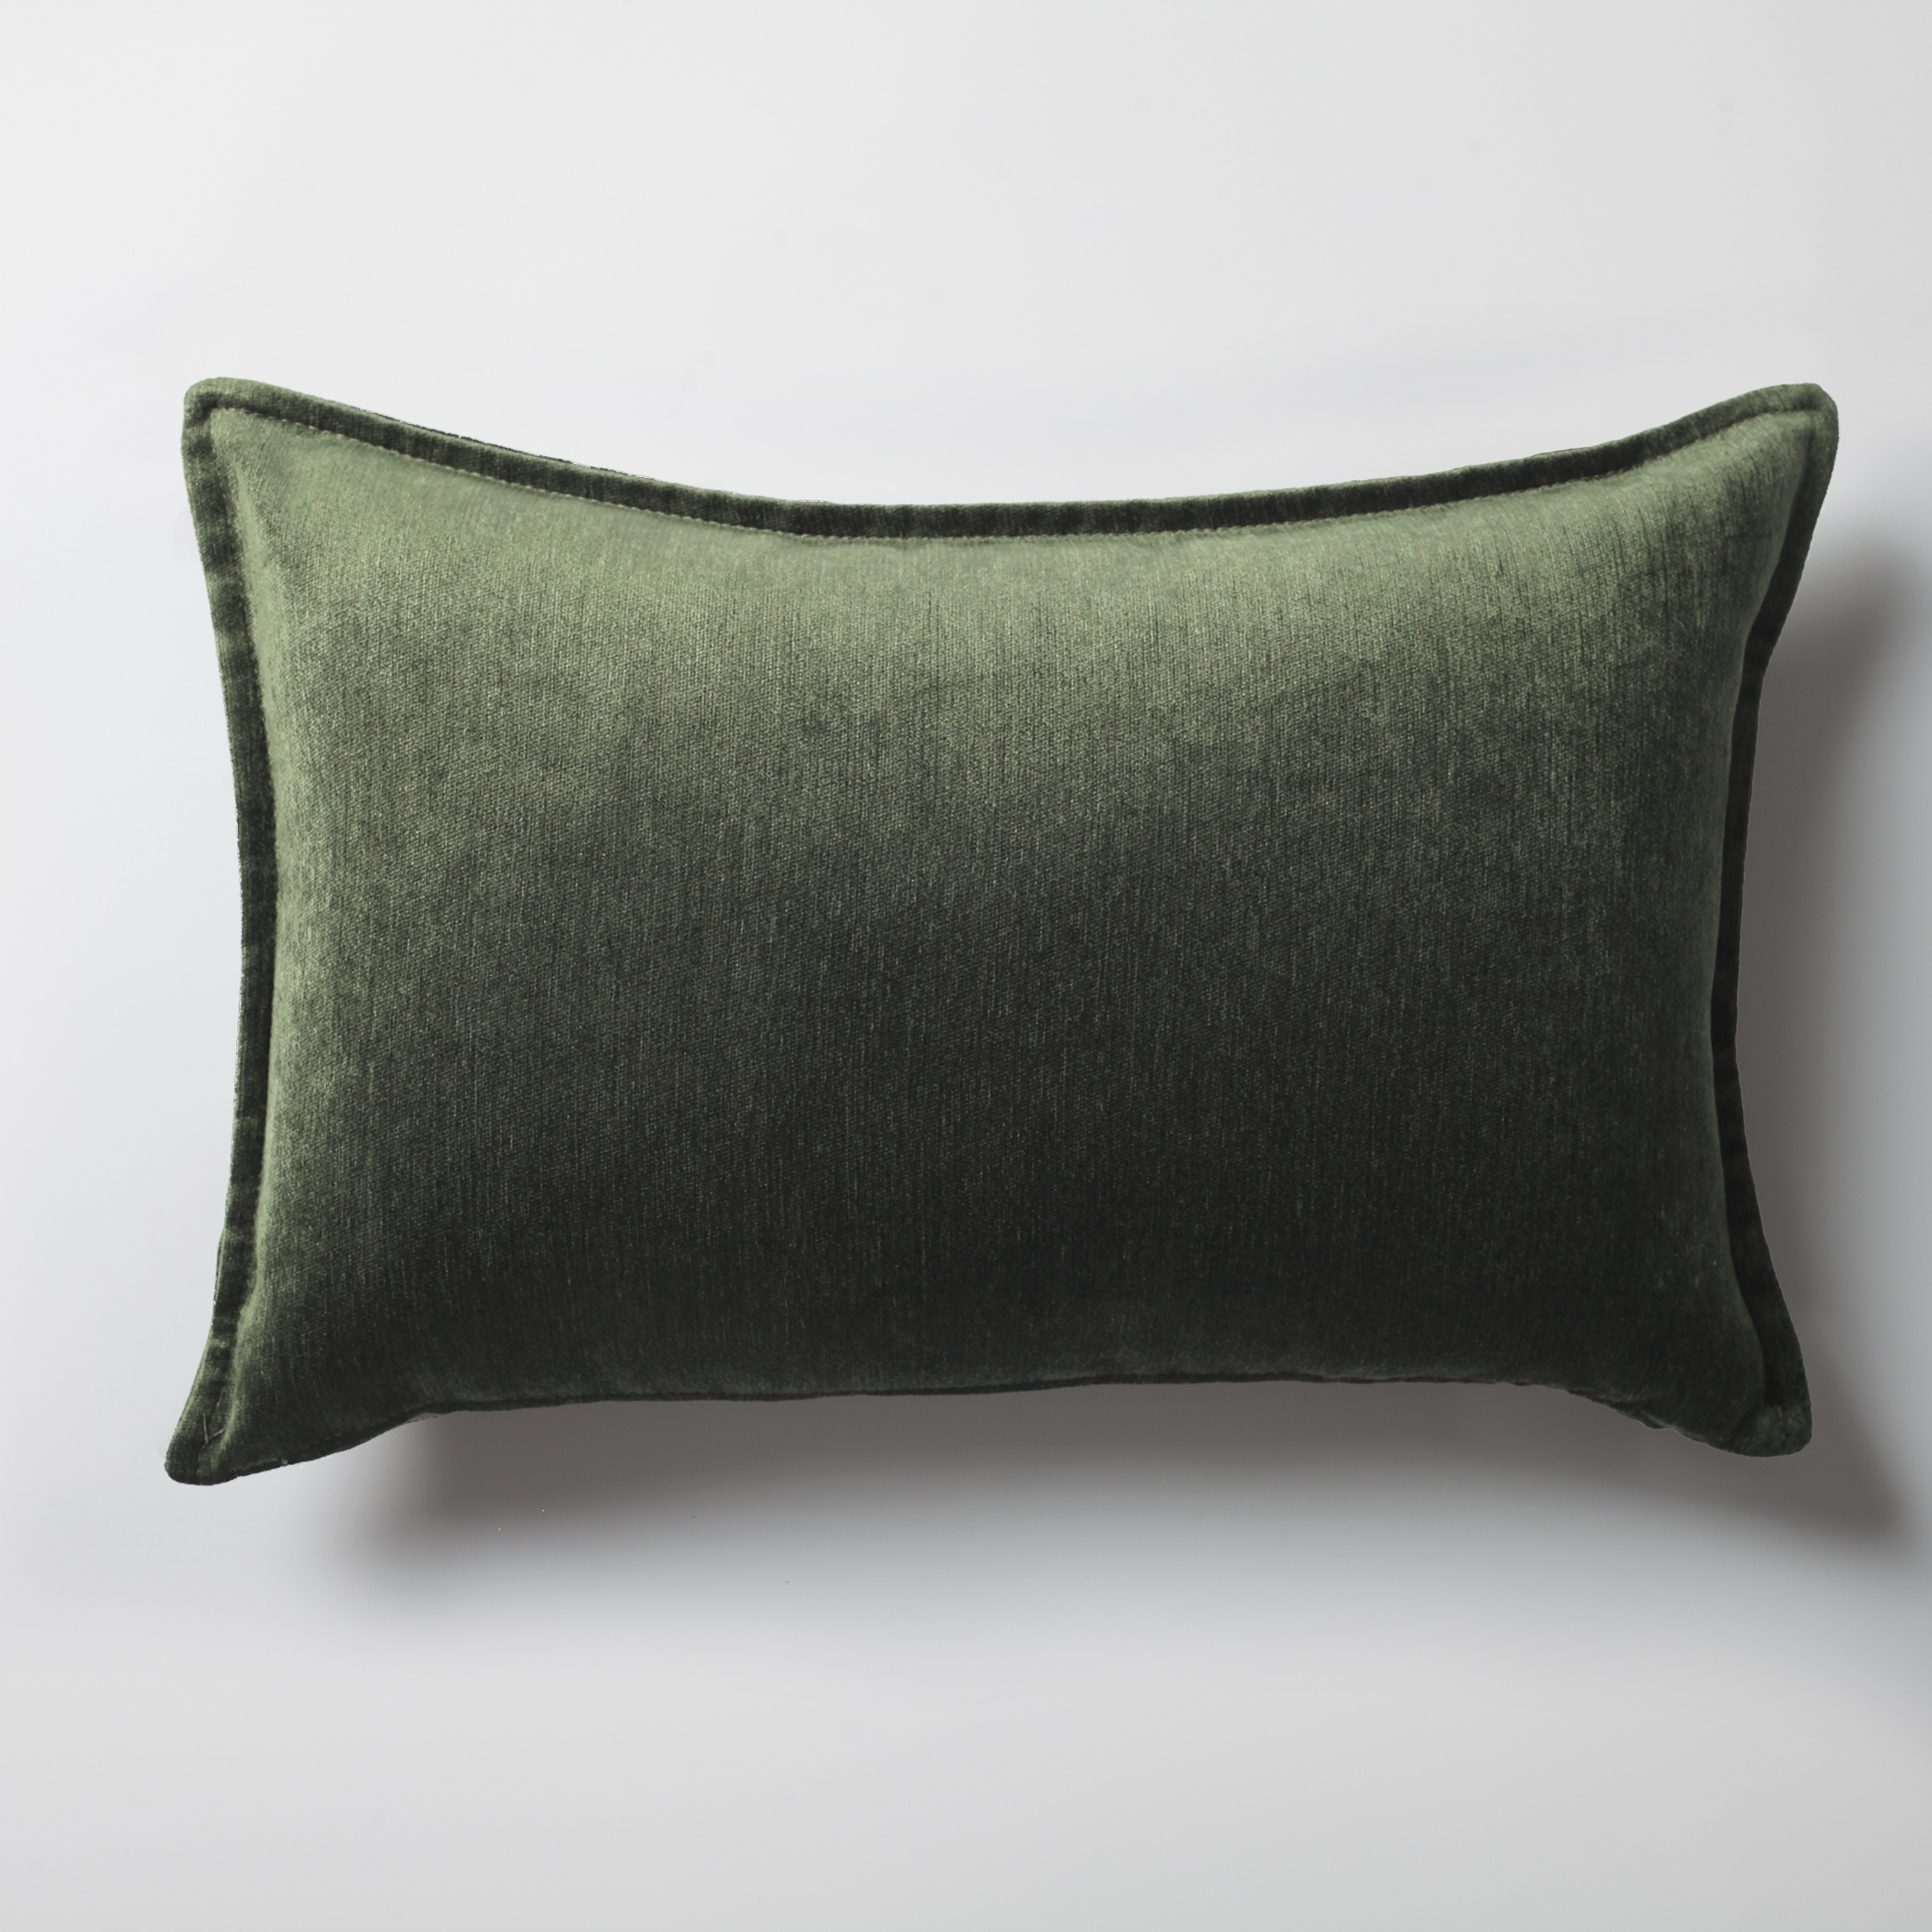 "Eliza" - Green Viscose Natural Linen Pillow 16x24 Inch - Green (Cover Only)